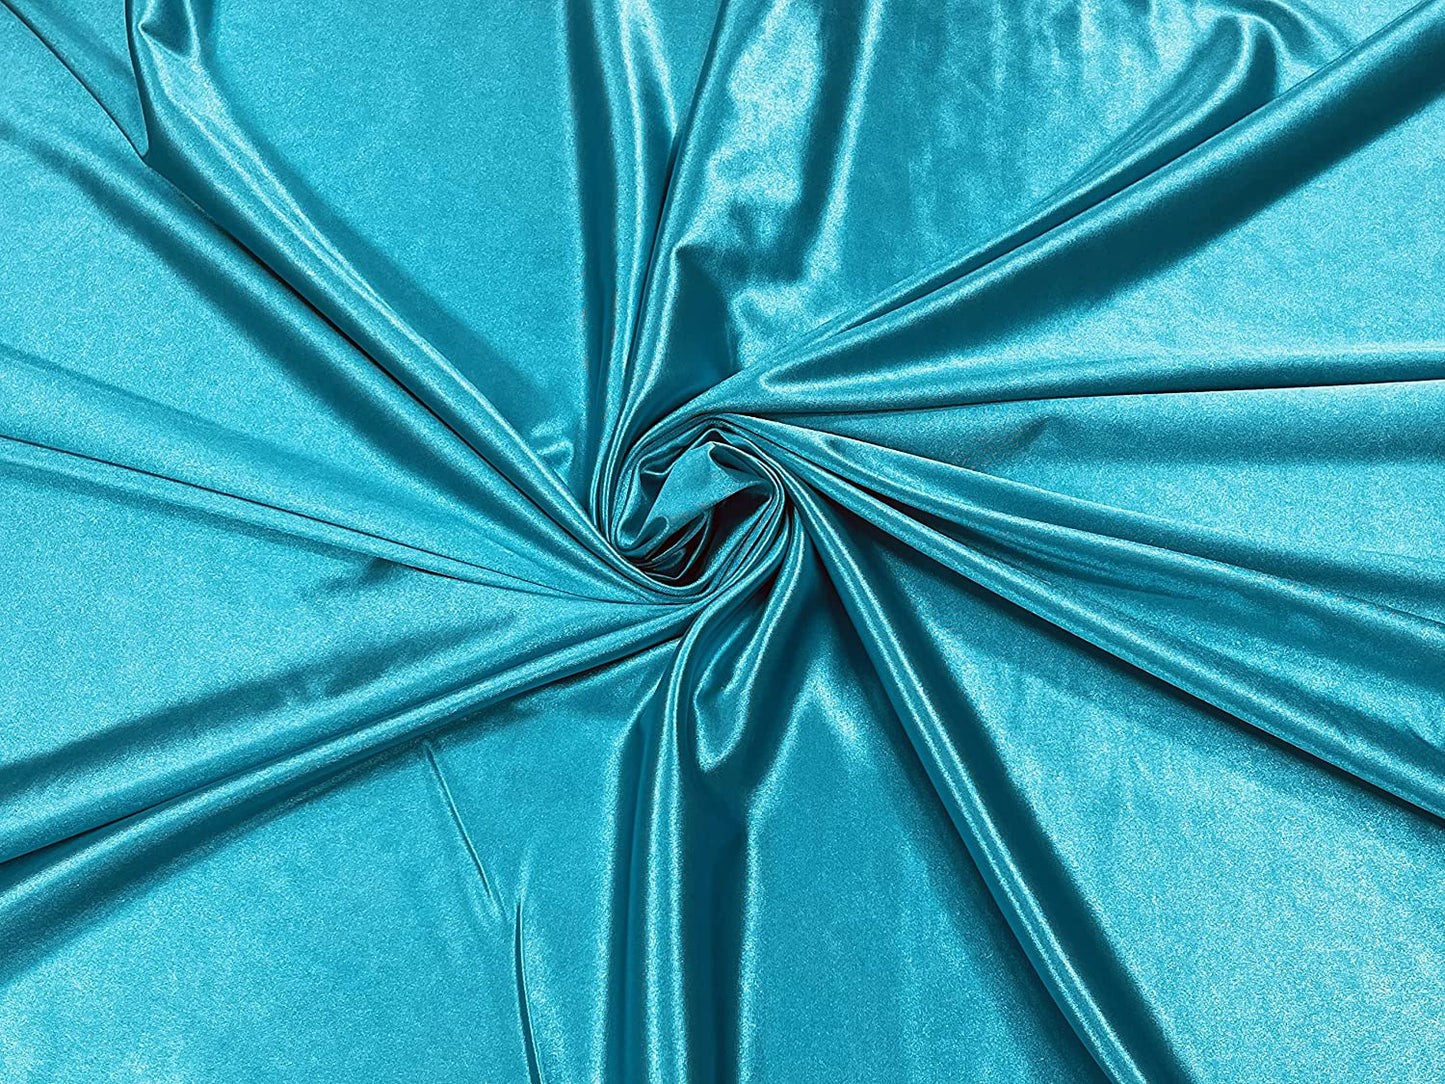 Deluxe Shiny Polyester Spandex Stretch Fabric (1 Yard, Turquoise)